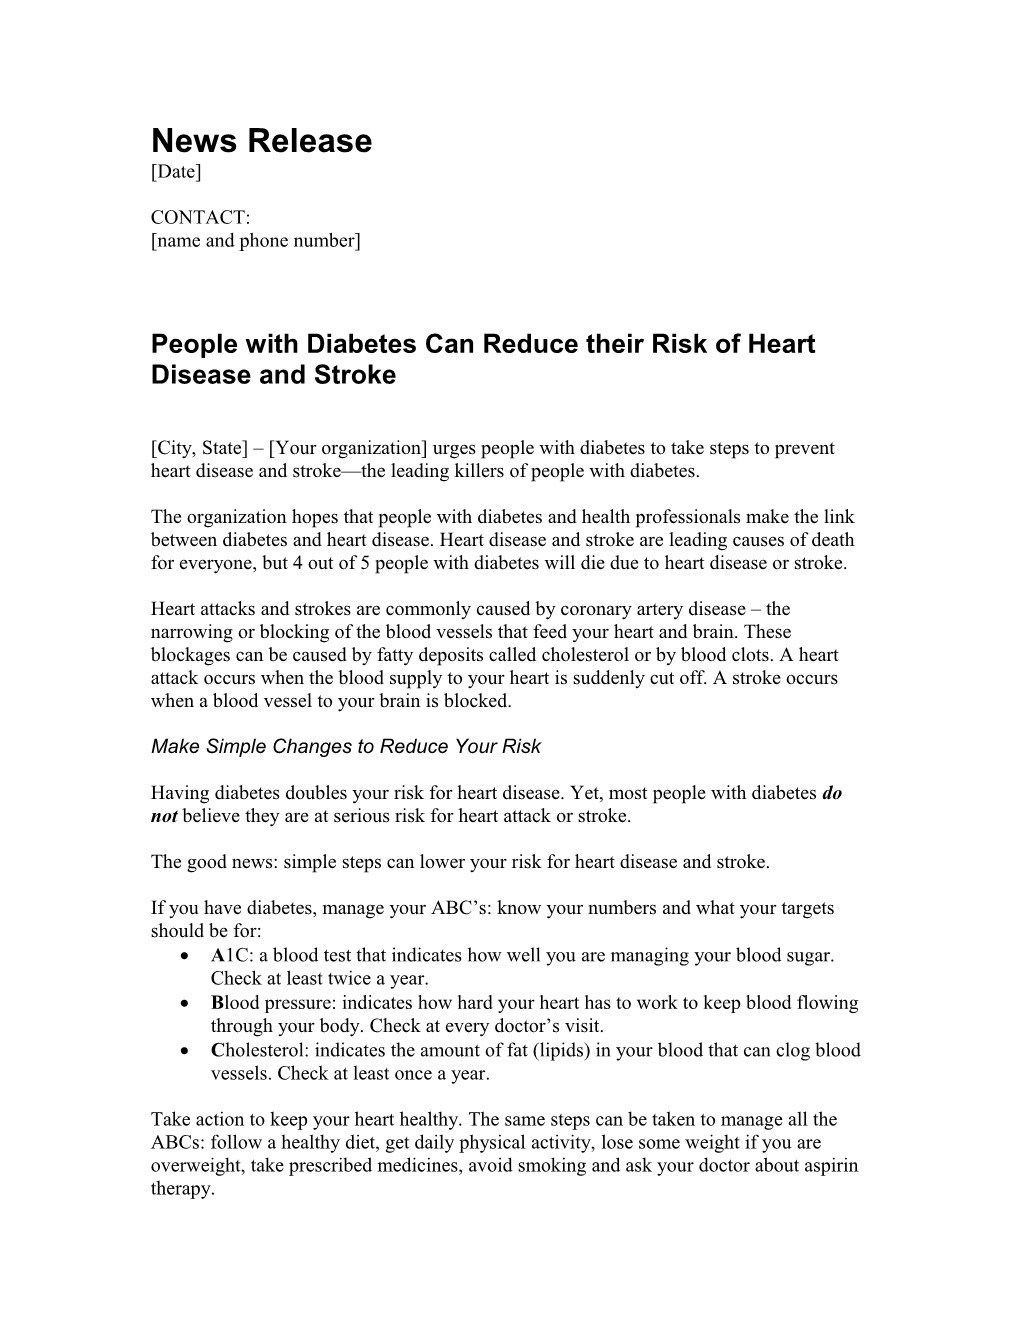 People with Diabetes Can Reduce Their Risk of Heart Disease and Stroke